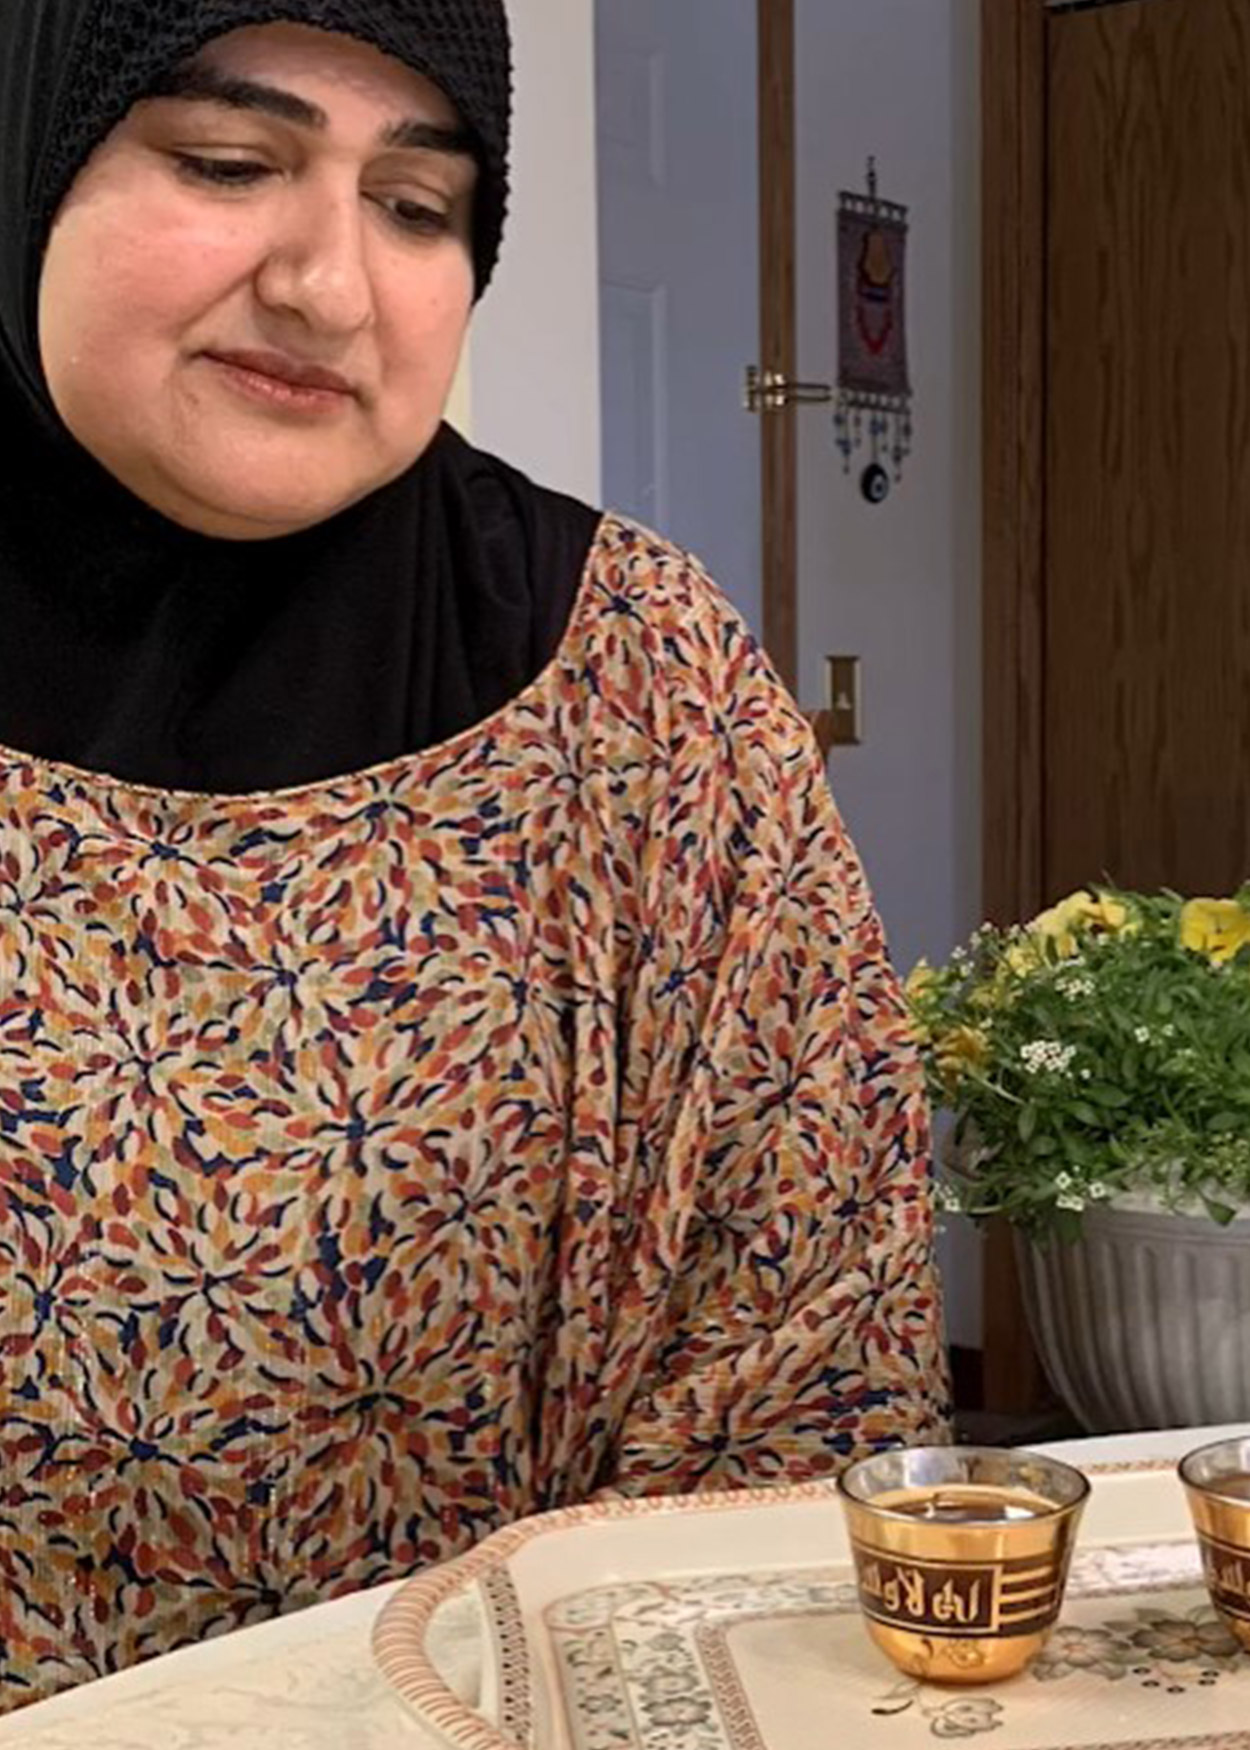 Image from Unveiled (2020). A South Asian woman, wearing a hijab, sitting at a kitchen table, looks at a cup of tea on a table.